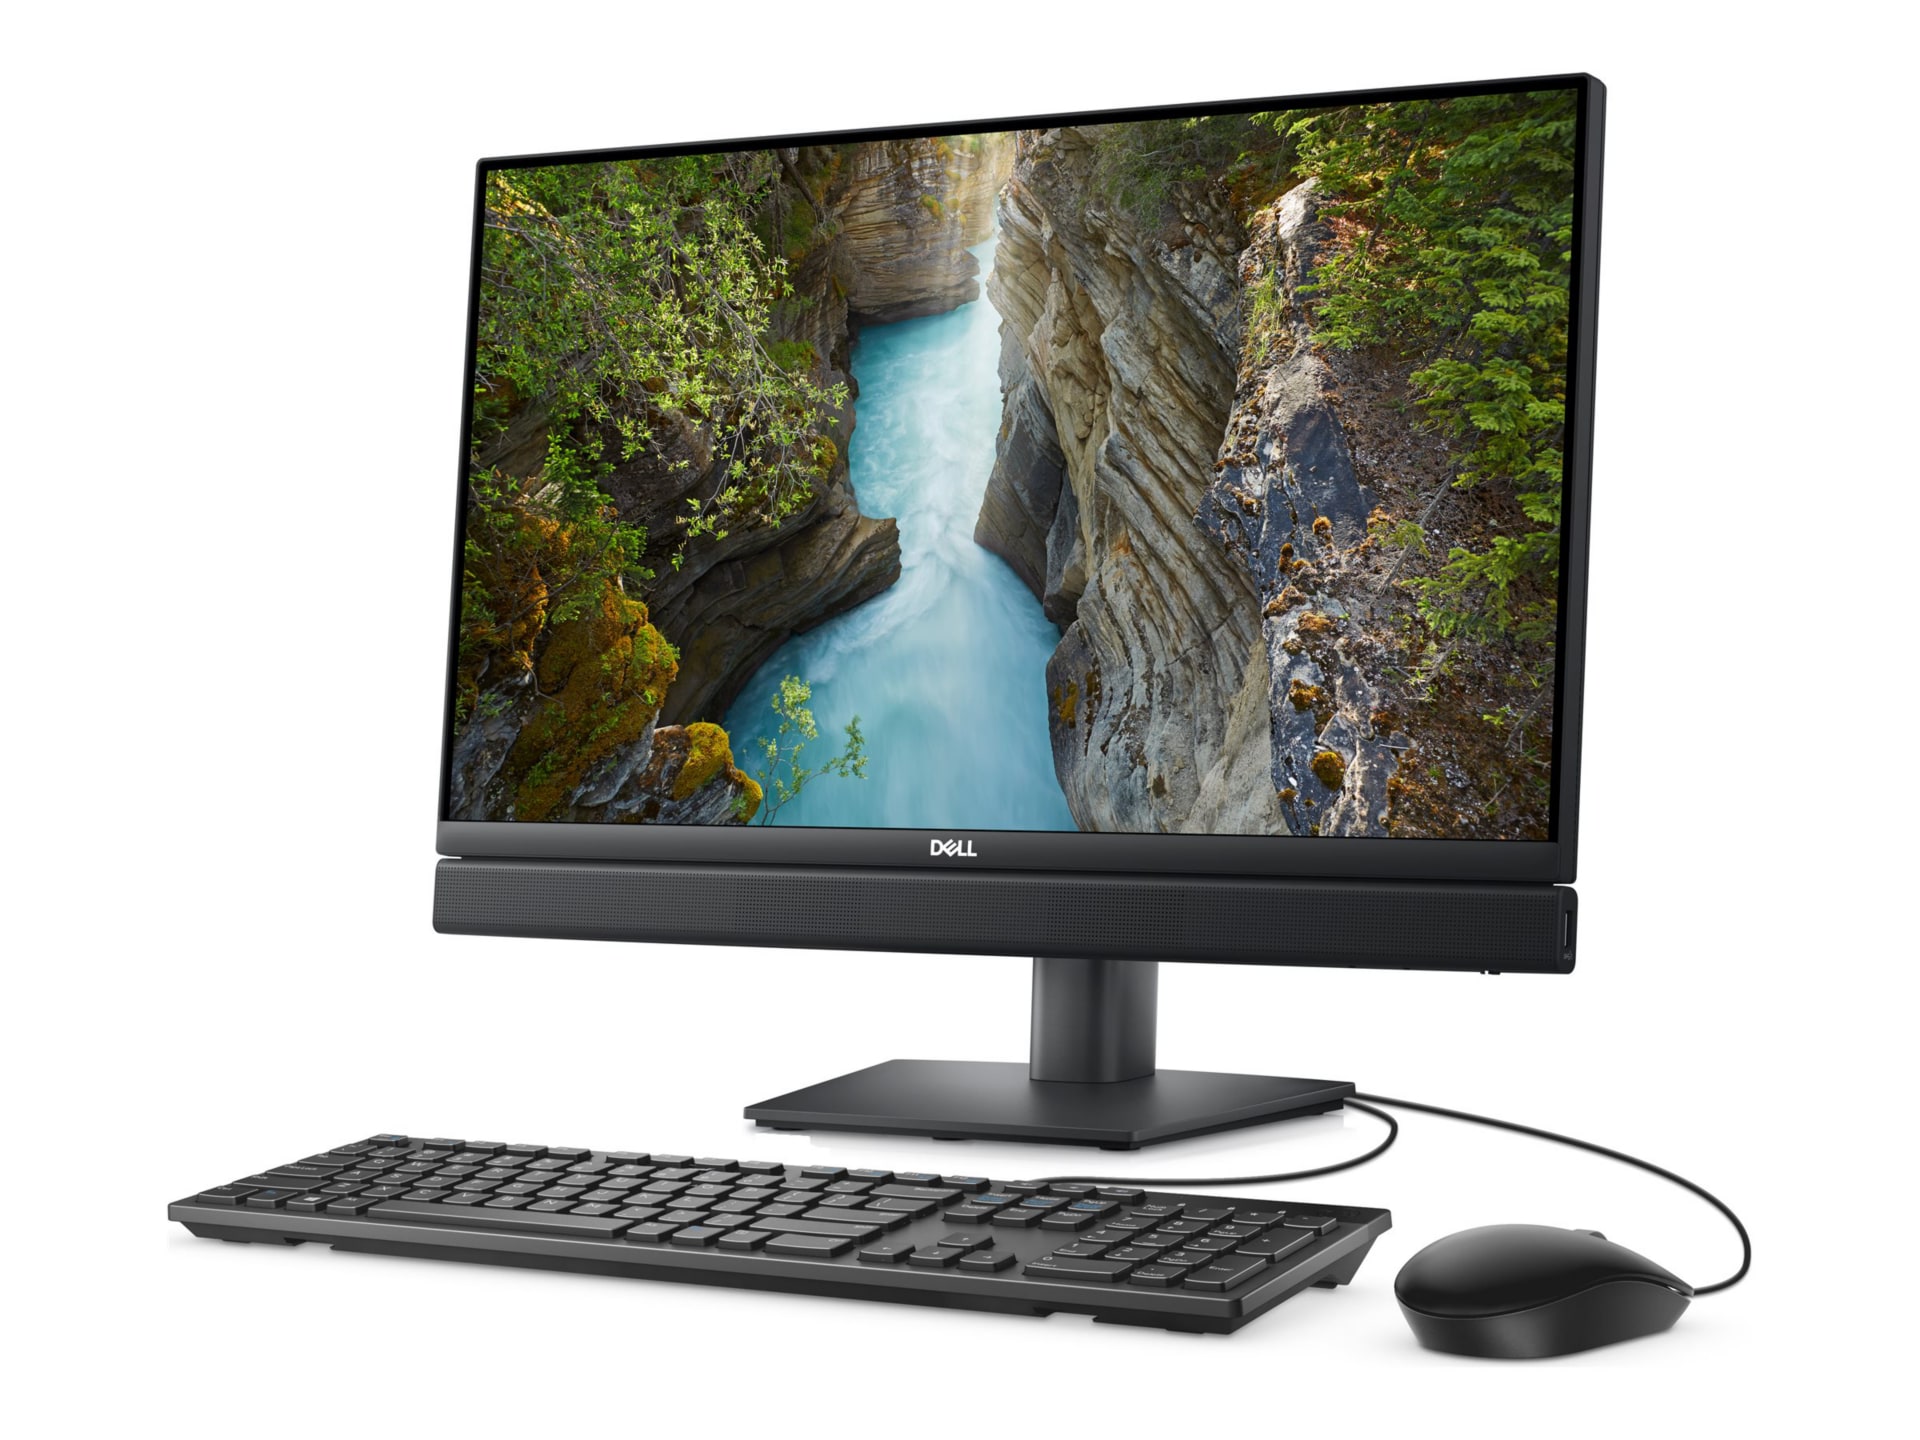 Dell OptiPlex 7410 All In One - all-in-one - Core i5 13500T 1.6 GHz - vPro Enterprise - 8 GB - SSD 256 GB - LED 23.81"